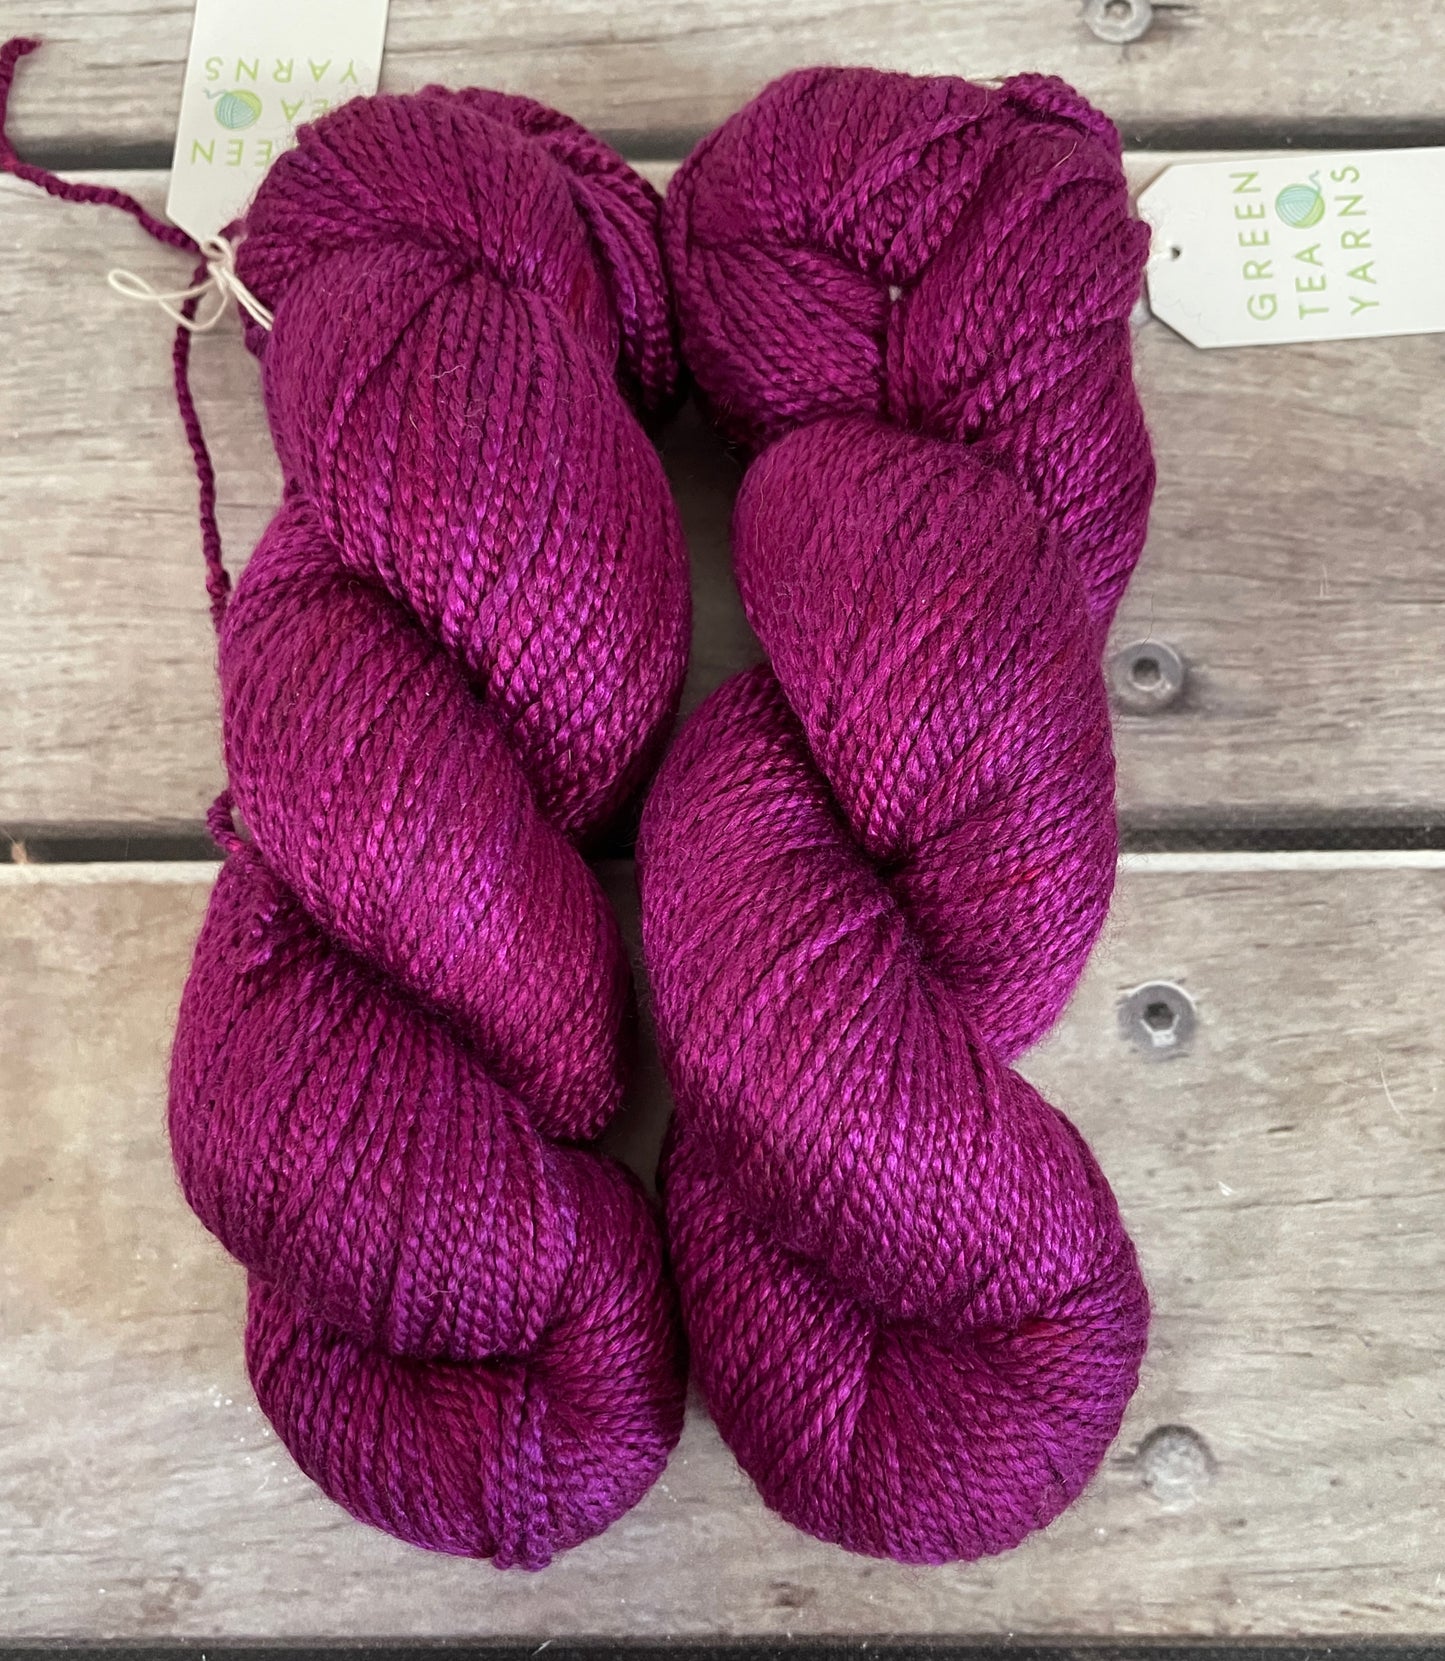 Wild Orchid - 8 ply silk and merino - White Cloud